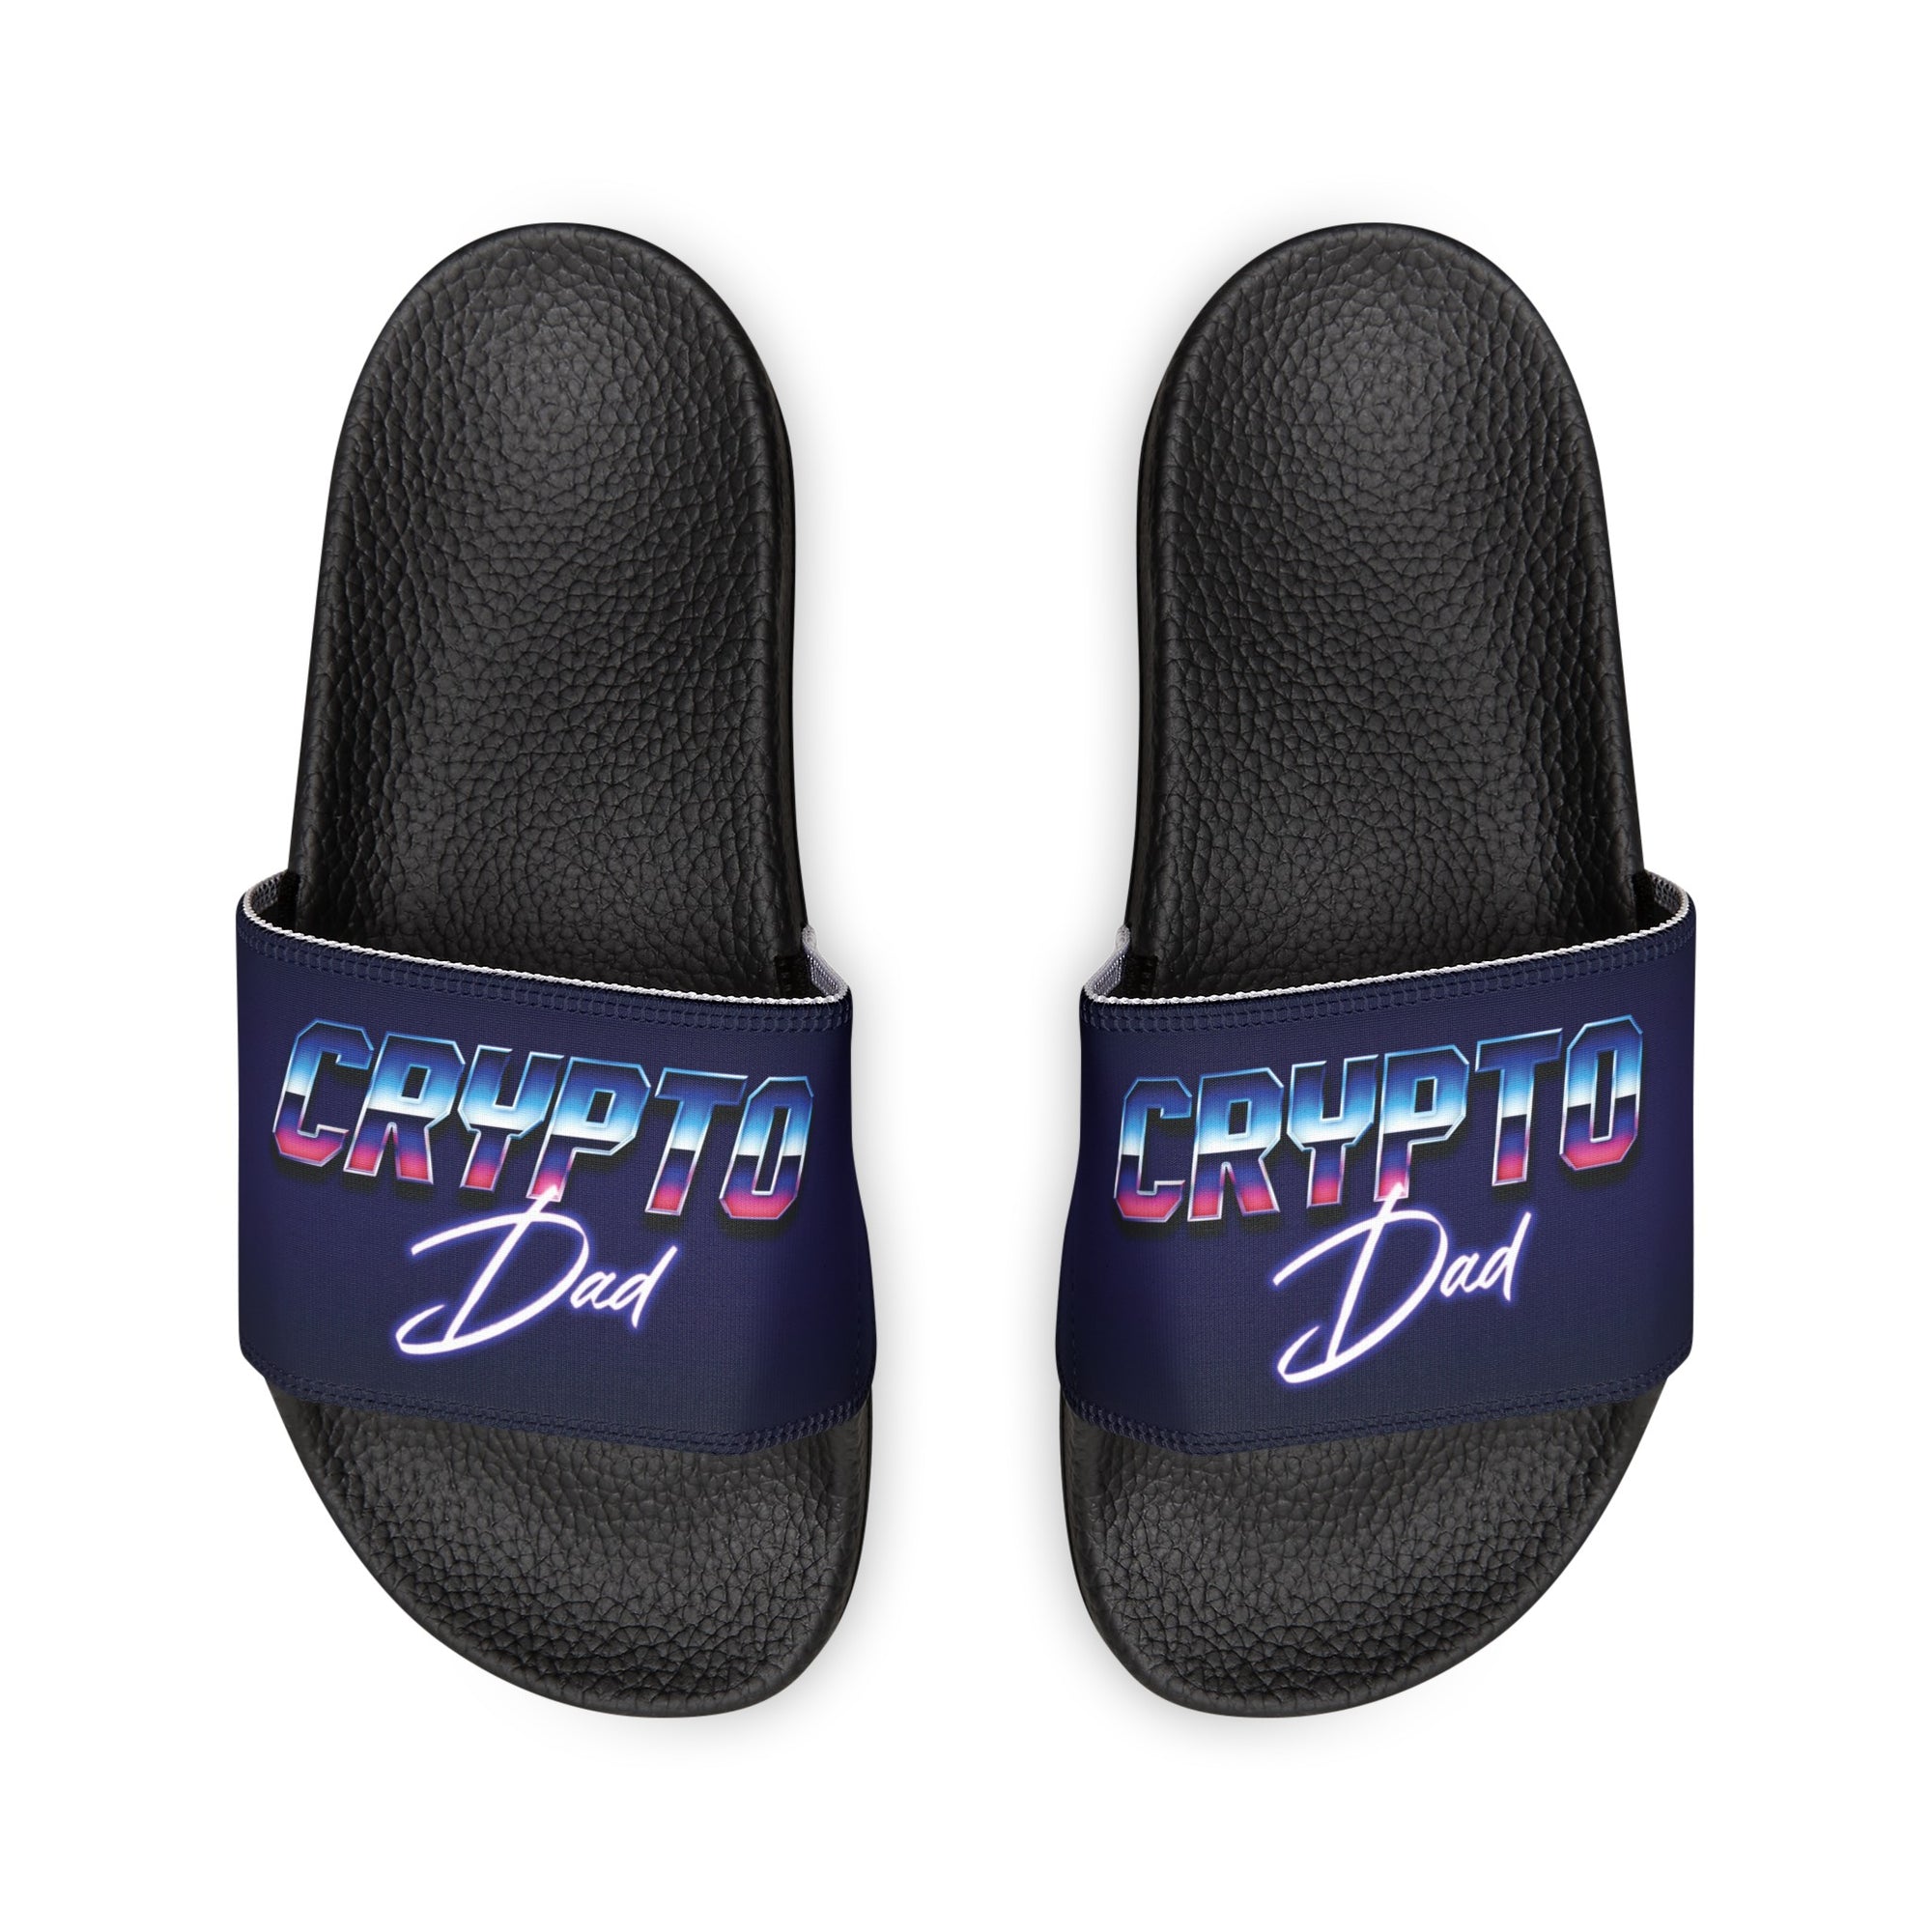 Crypto Dad Slide Sandals - Unique Retro Style Crypto Footwear. Available at NEONCRYPTO STORE.